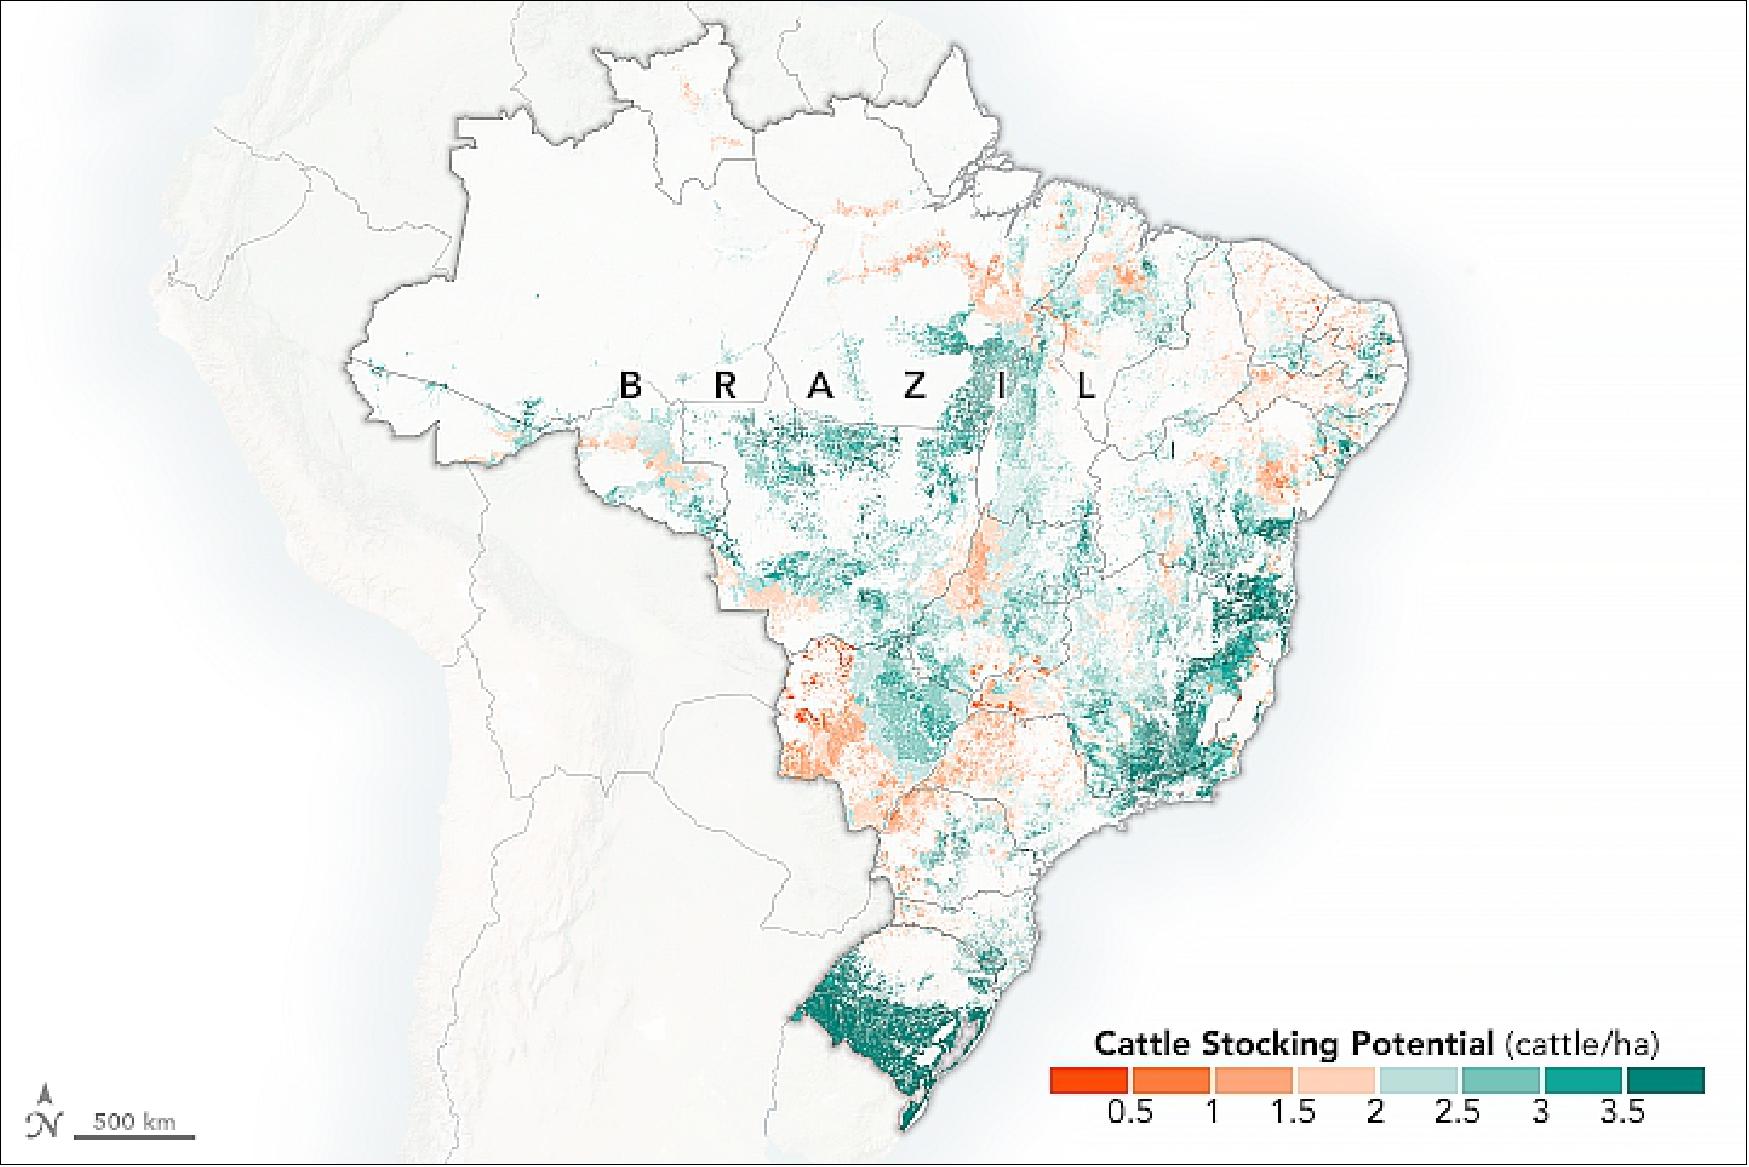 Figure 98: This map of 2015 highlights areas where the land can support more cattle. Most noticeably, the pastures in the Pampas region in the south can support as much as three times more cattle per hectare. (One cattle unit is estimated at 450 kilograms, or 990 pounds, per hectare.) The information was calculated by estimating the amount of cows on the land, the vegetative health of the pasturelands as observed from the Normalized Difference Vegetation Index (NDVI) and primary productivity values from NASA satellites, and a typical cow's foraging needs. These maps provide only an estimation, as limitations of soil, topography and infrastructure need to be considered (image credit: NASA Earth Observatory, image by Joshua Stevens, using data courtesy of Arantes, A. E., et al. (2018), story by Kasha Patel)